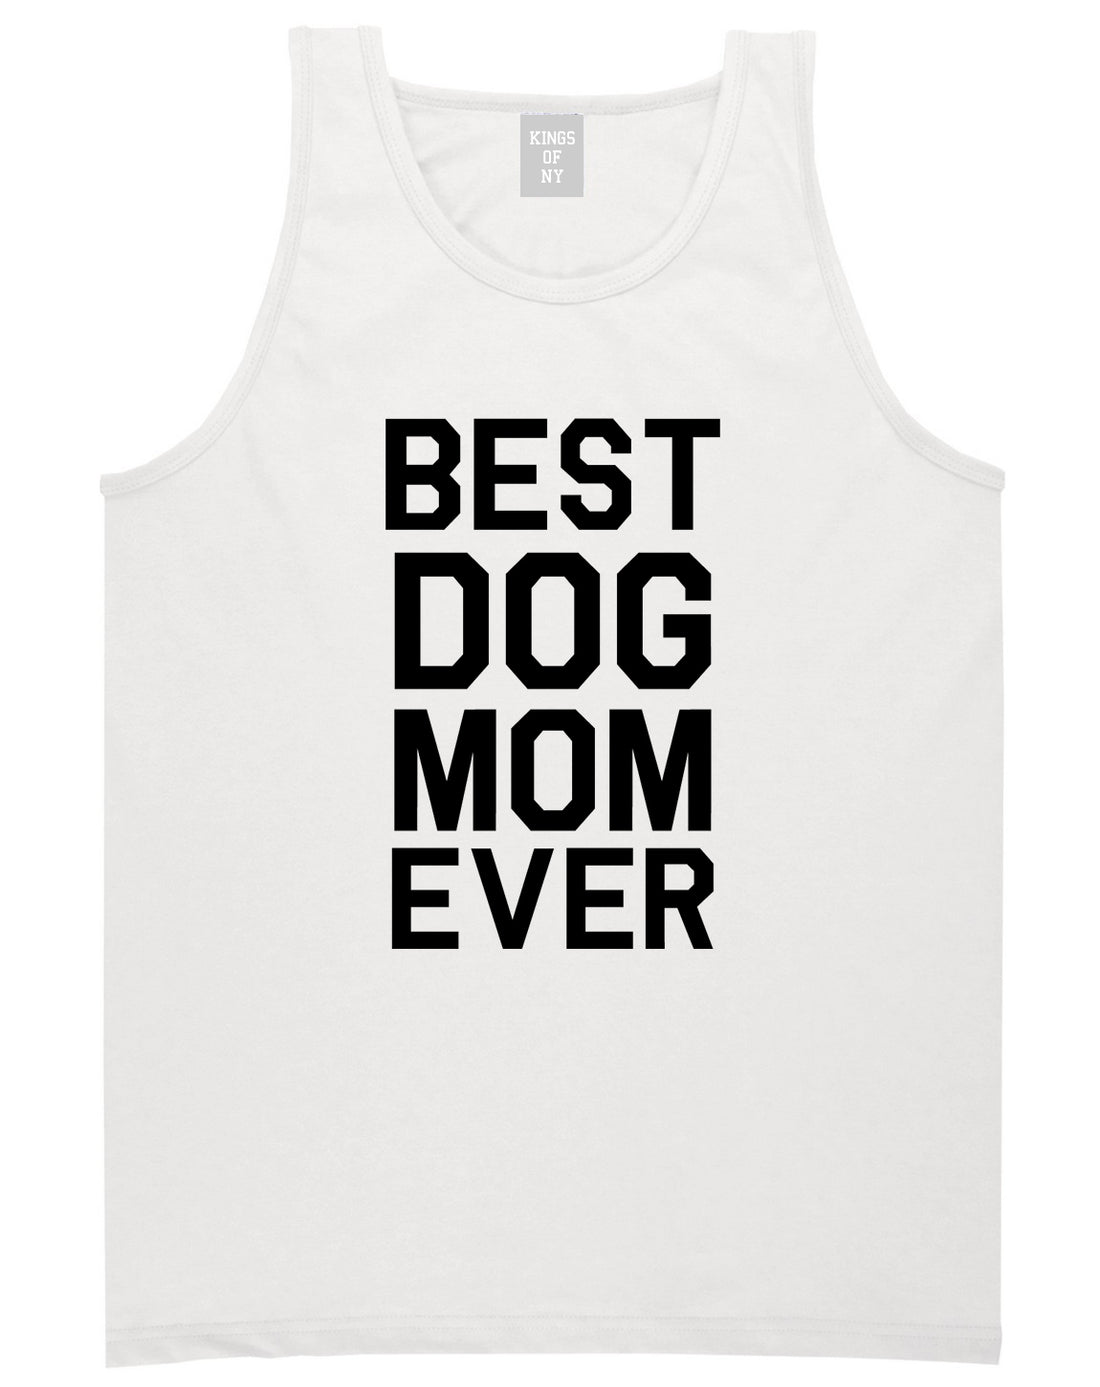 Best_Dog_Mom_Ever Mens White Tank Top Shirt by Kings Of NY